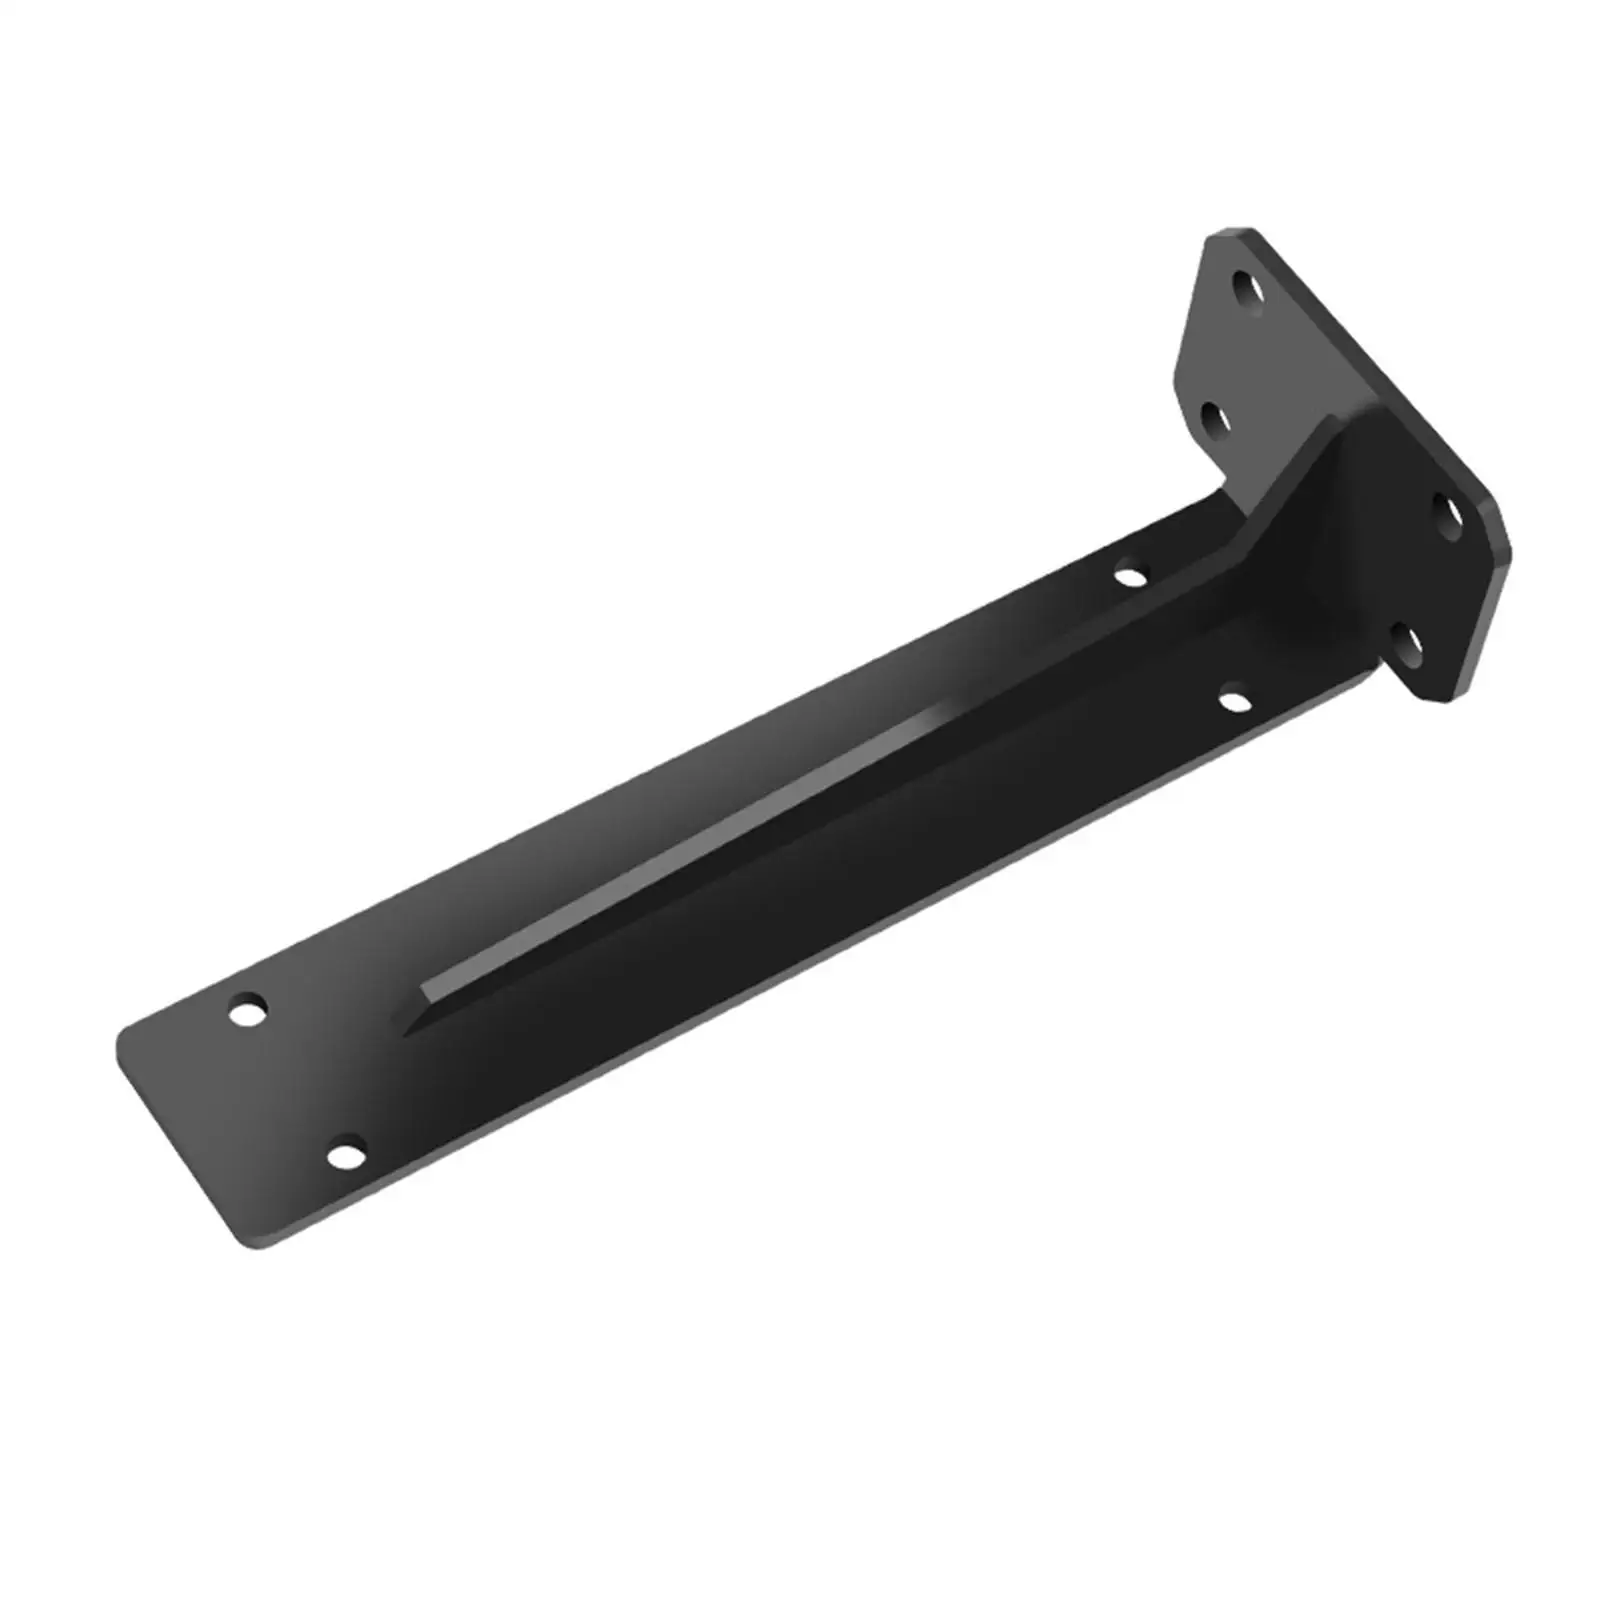 Shelf Bracket Strong Load Bearing Right Angle Metal Durable Support for Storage Rack Chair Drawer Bookshelf Furniture